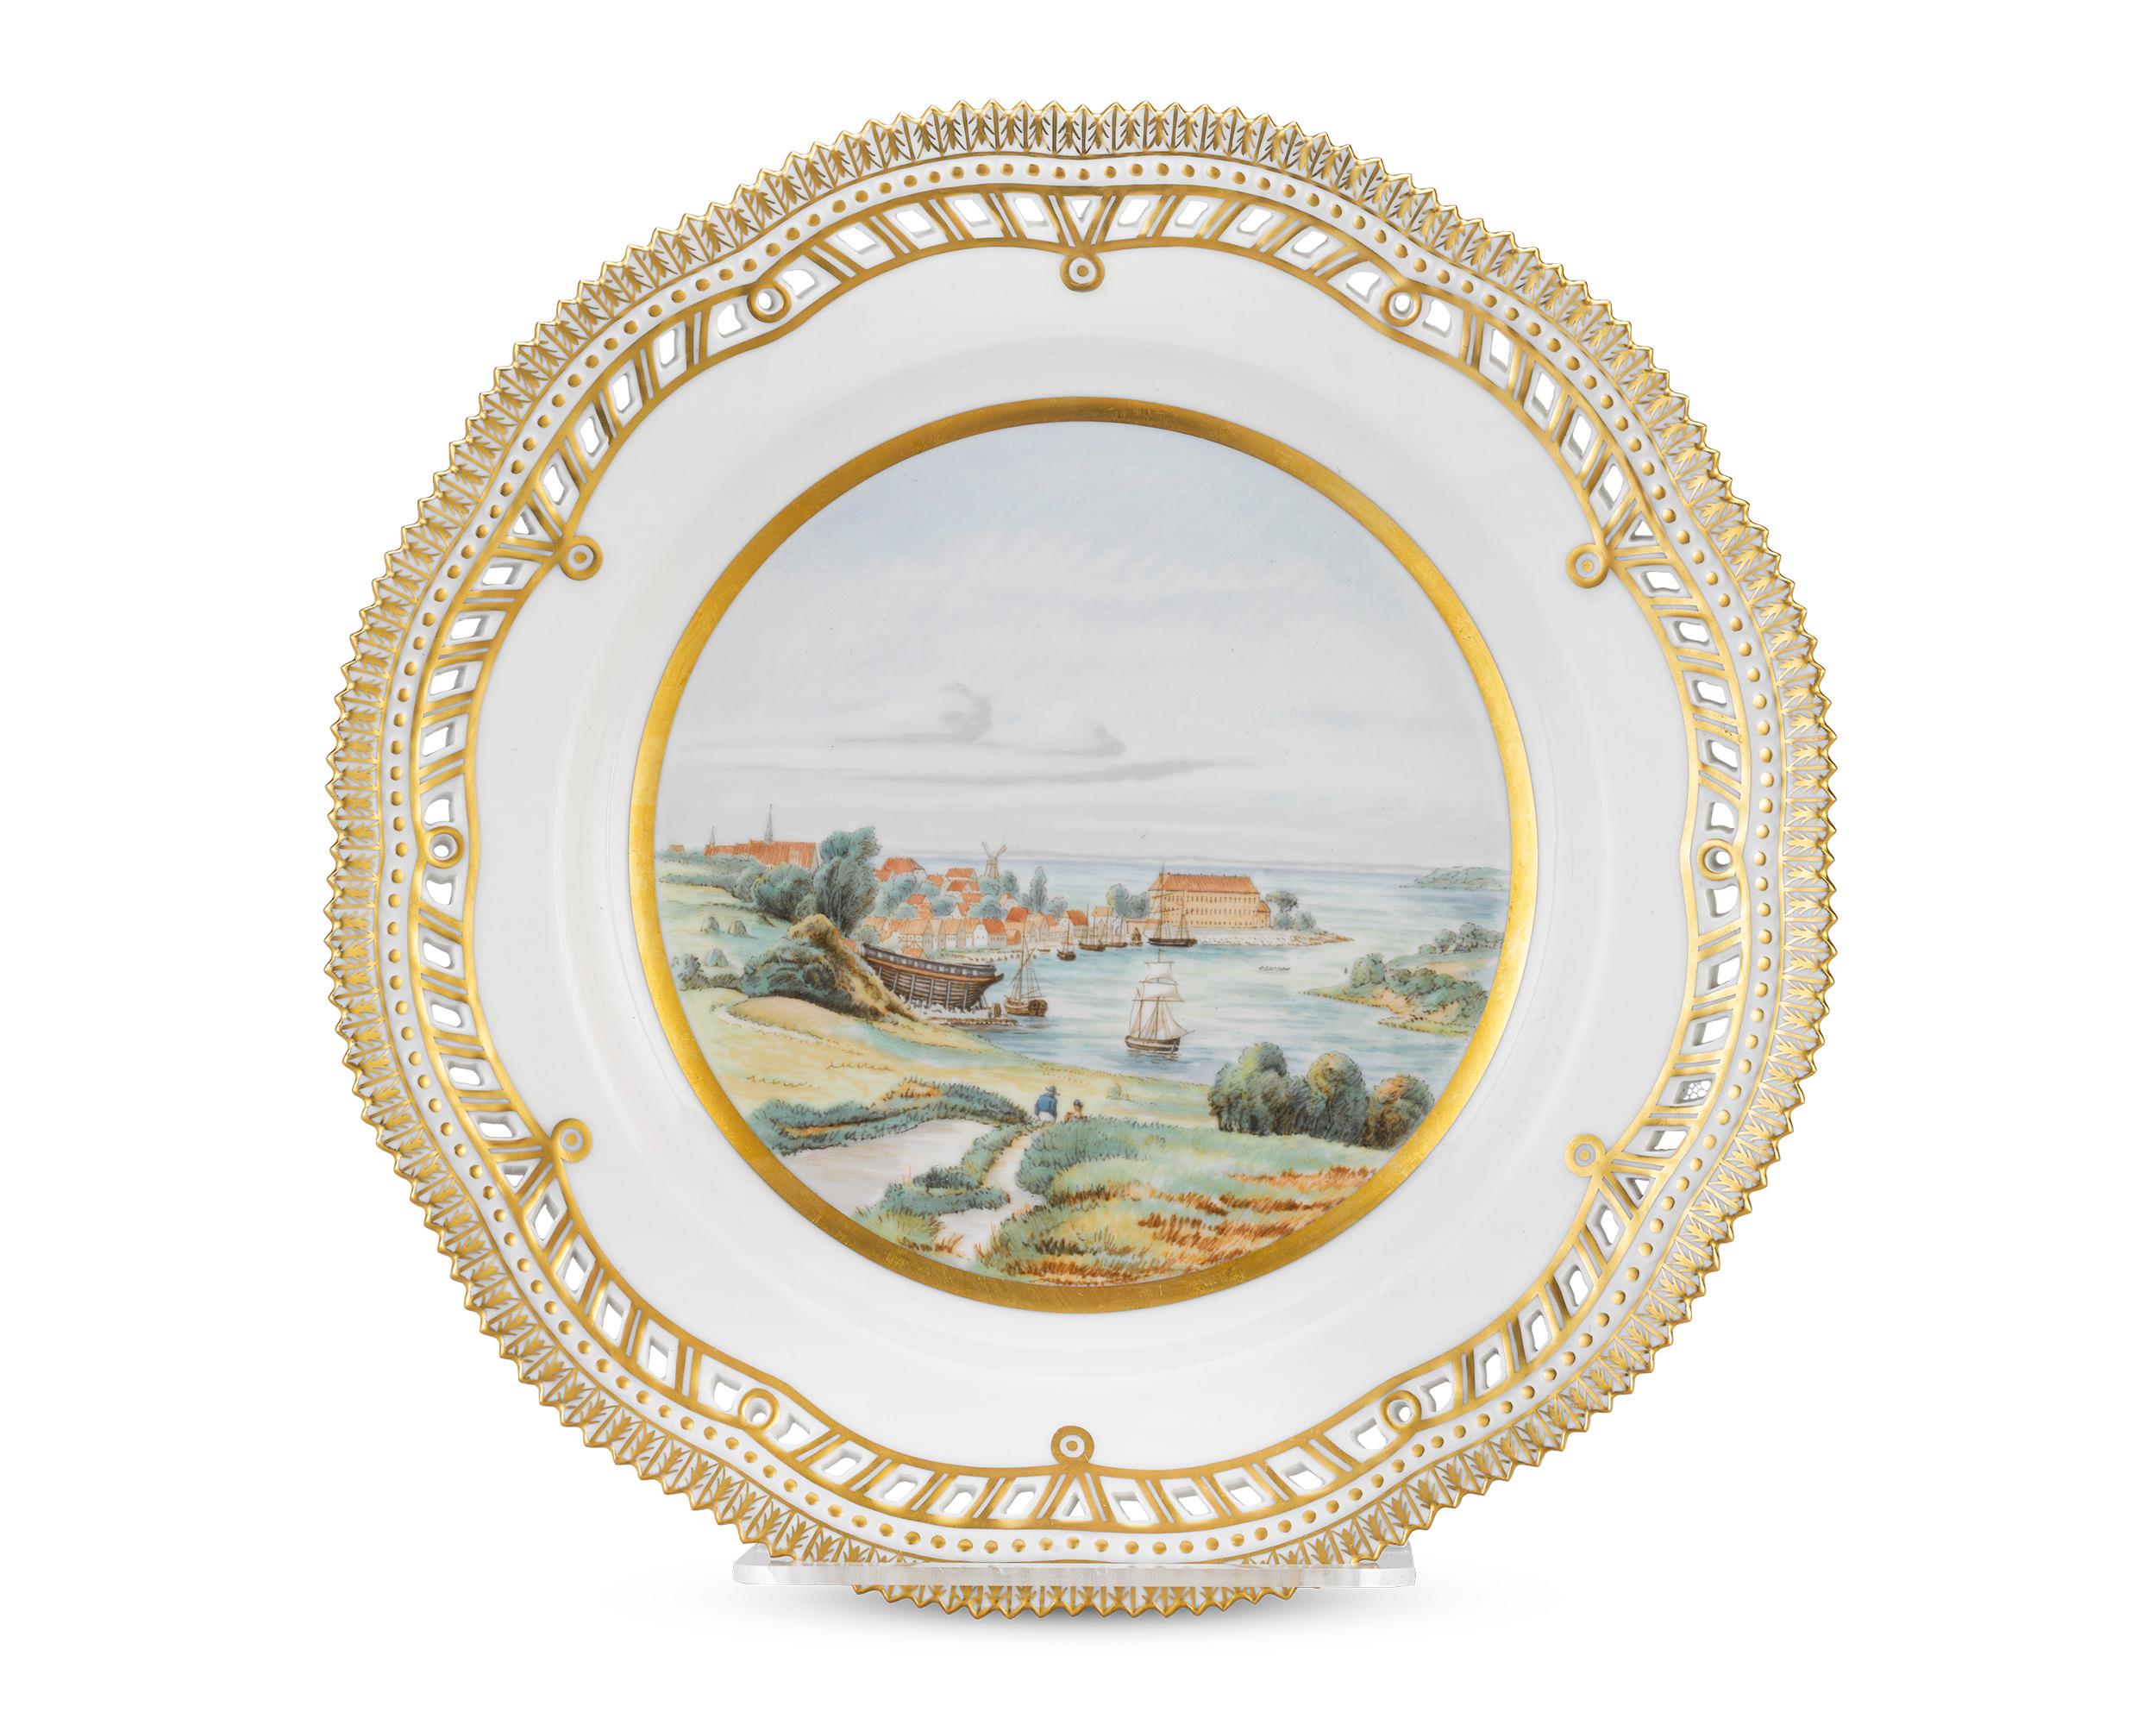 This plate by the celebrated porcelain firm of Royal Copenhagen features a wonderfully detailed seascape complete with ships and a quaint Danish village surrounding the Sonderborg Castle. Additional gilt decoration and a delicately frilled edge